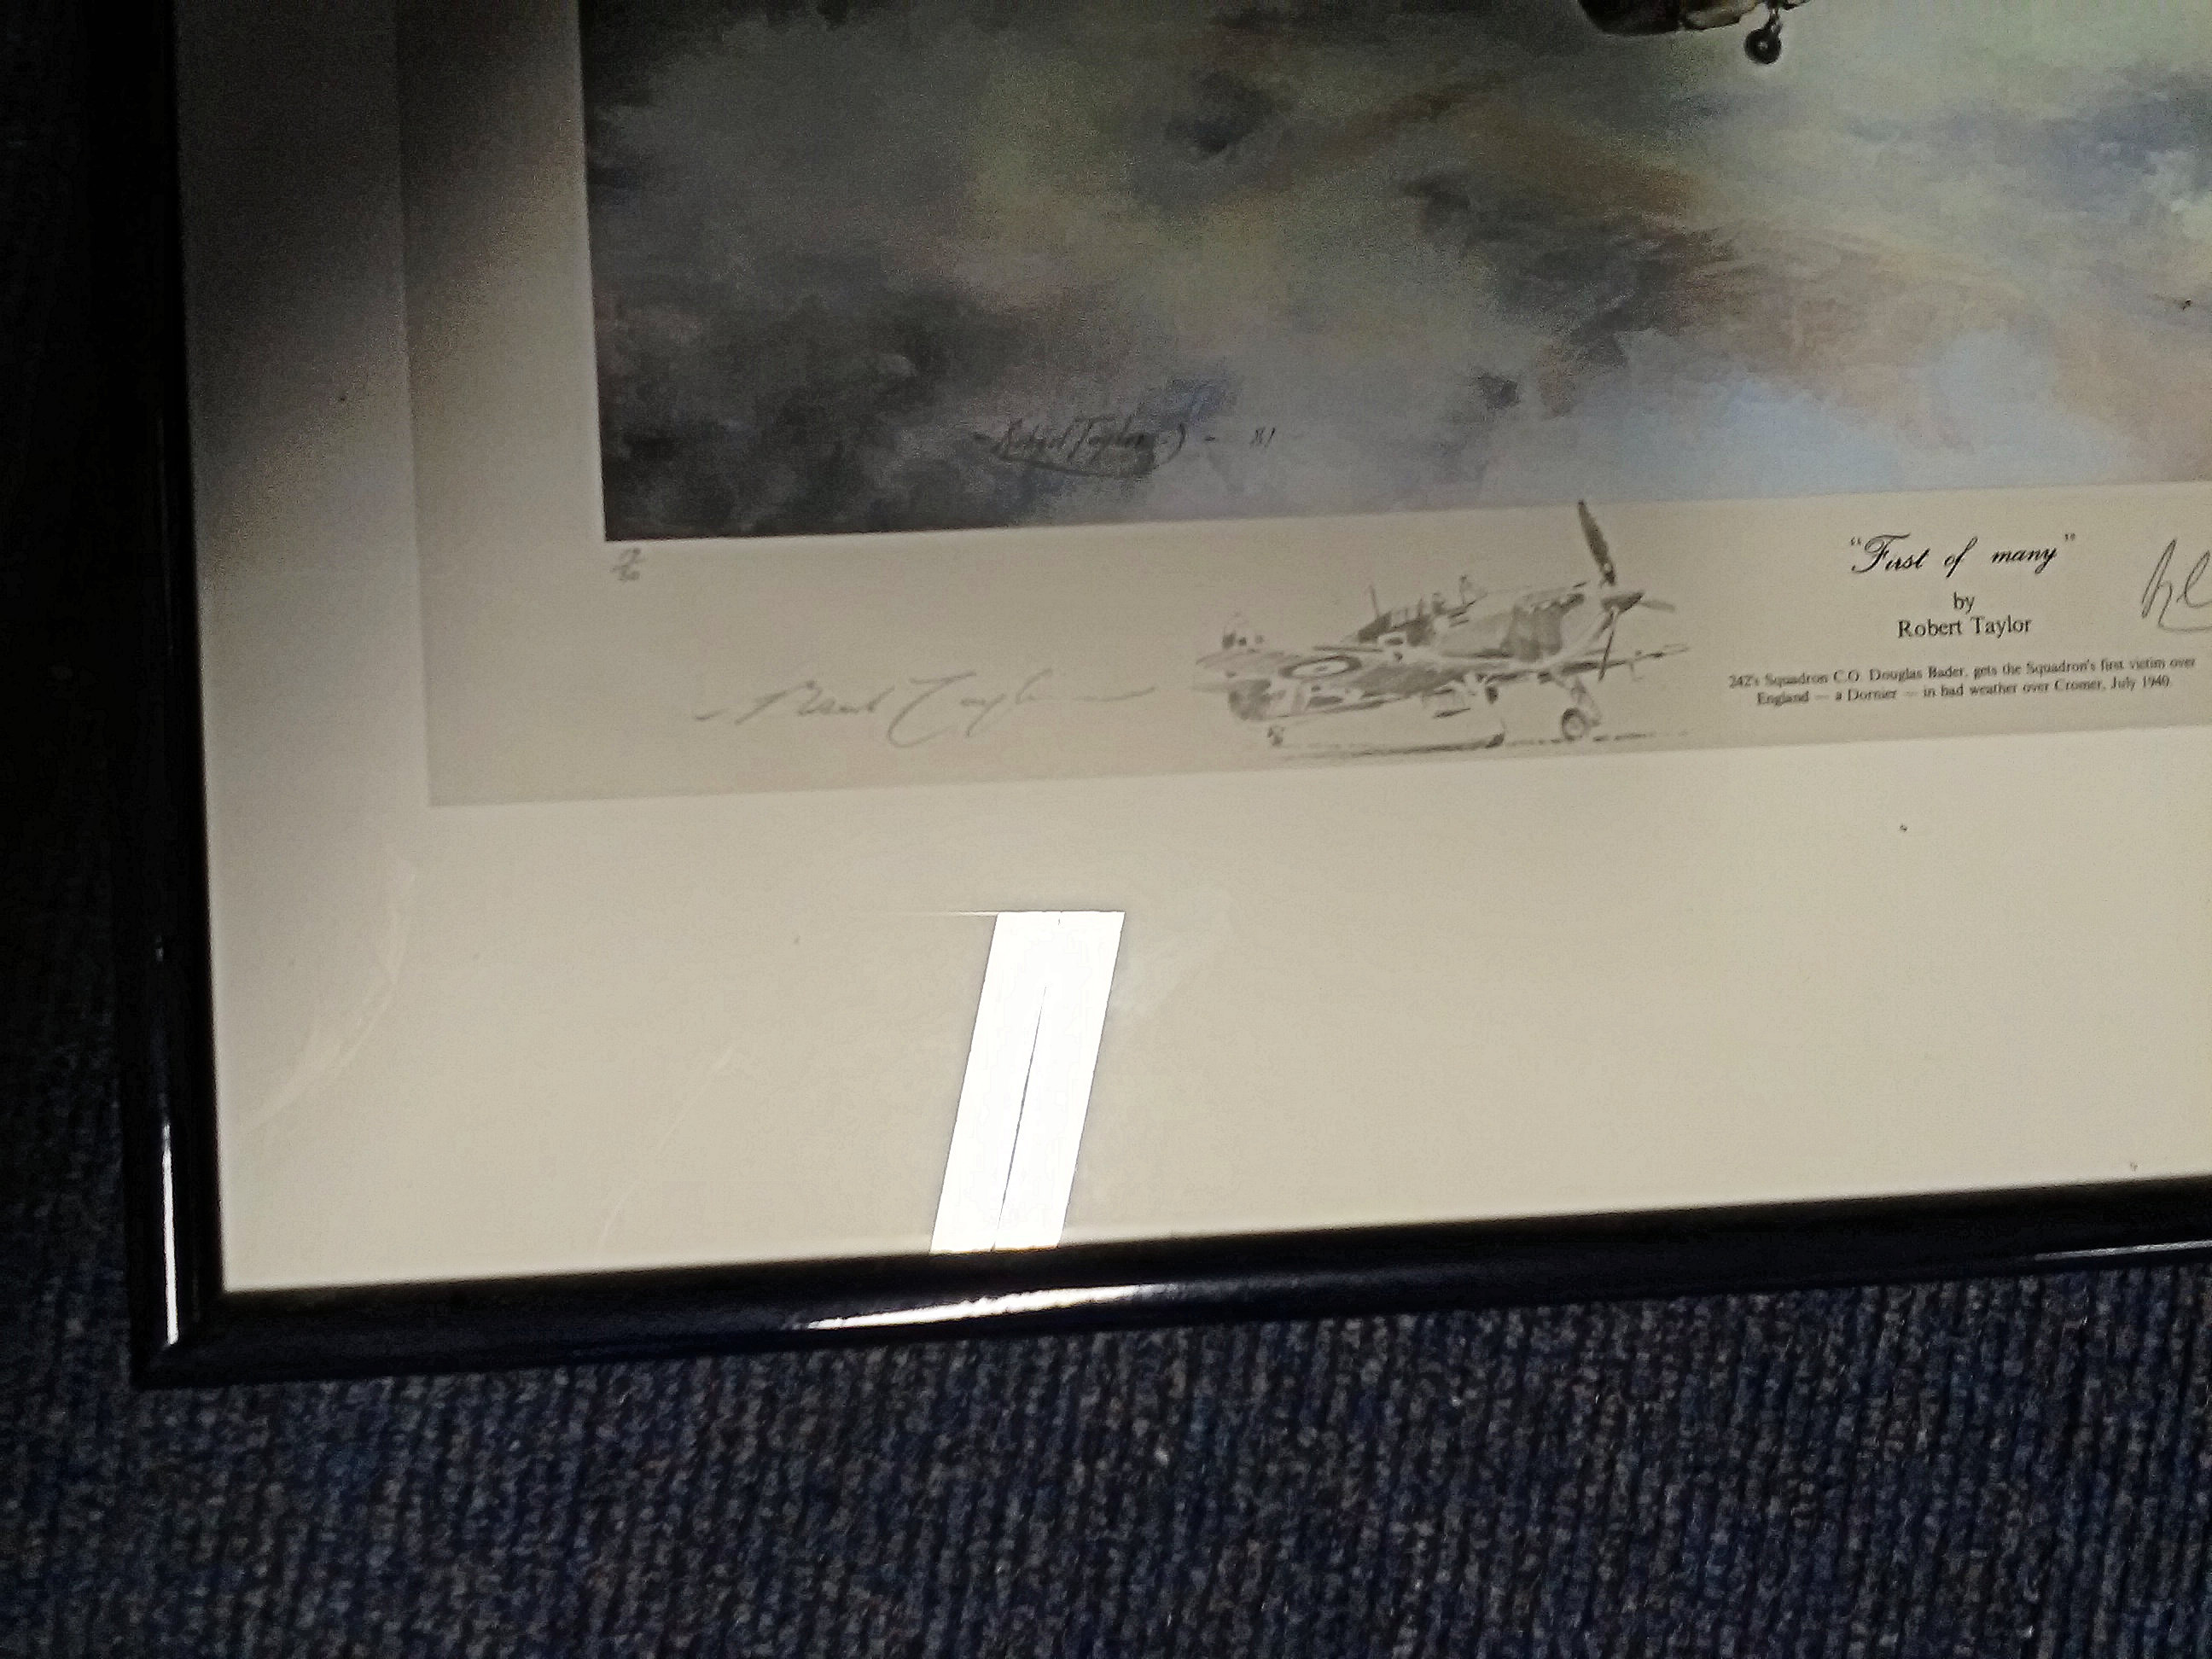 Rare WW2 Robert Taylor Pair of 1981 Remarqued framed prints, First of Many signed Douglas Bader - Image 4 of 6